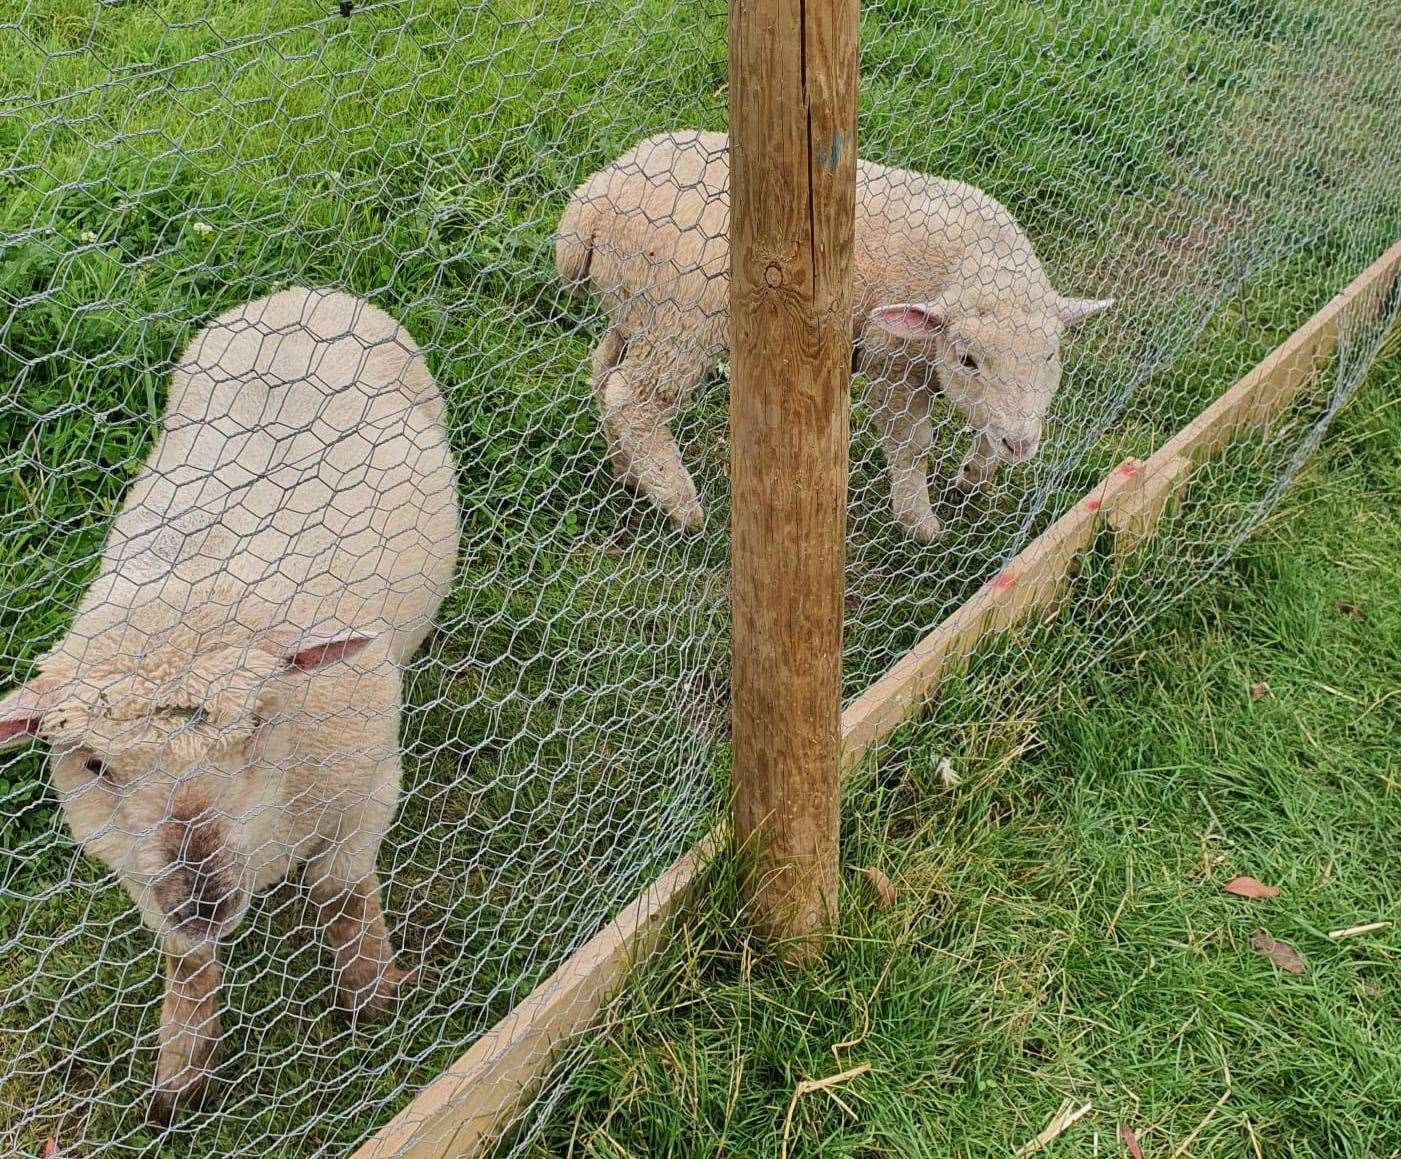 Mr Harris hand-reared the pair, pictured as lambs, himself. Picture: Leon Harris